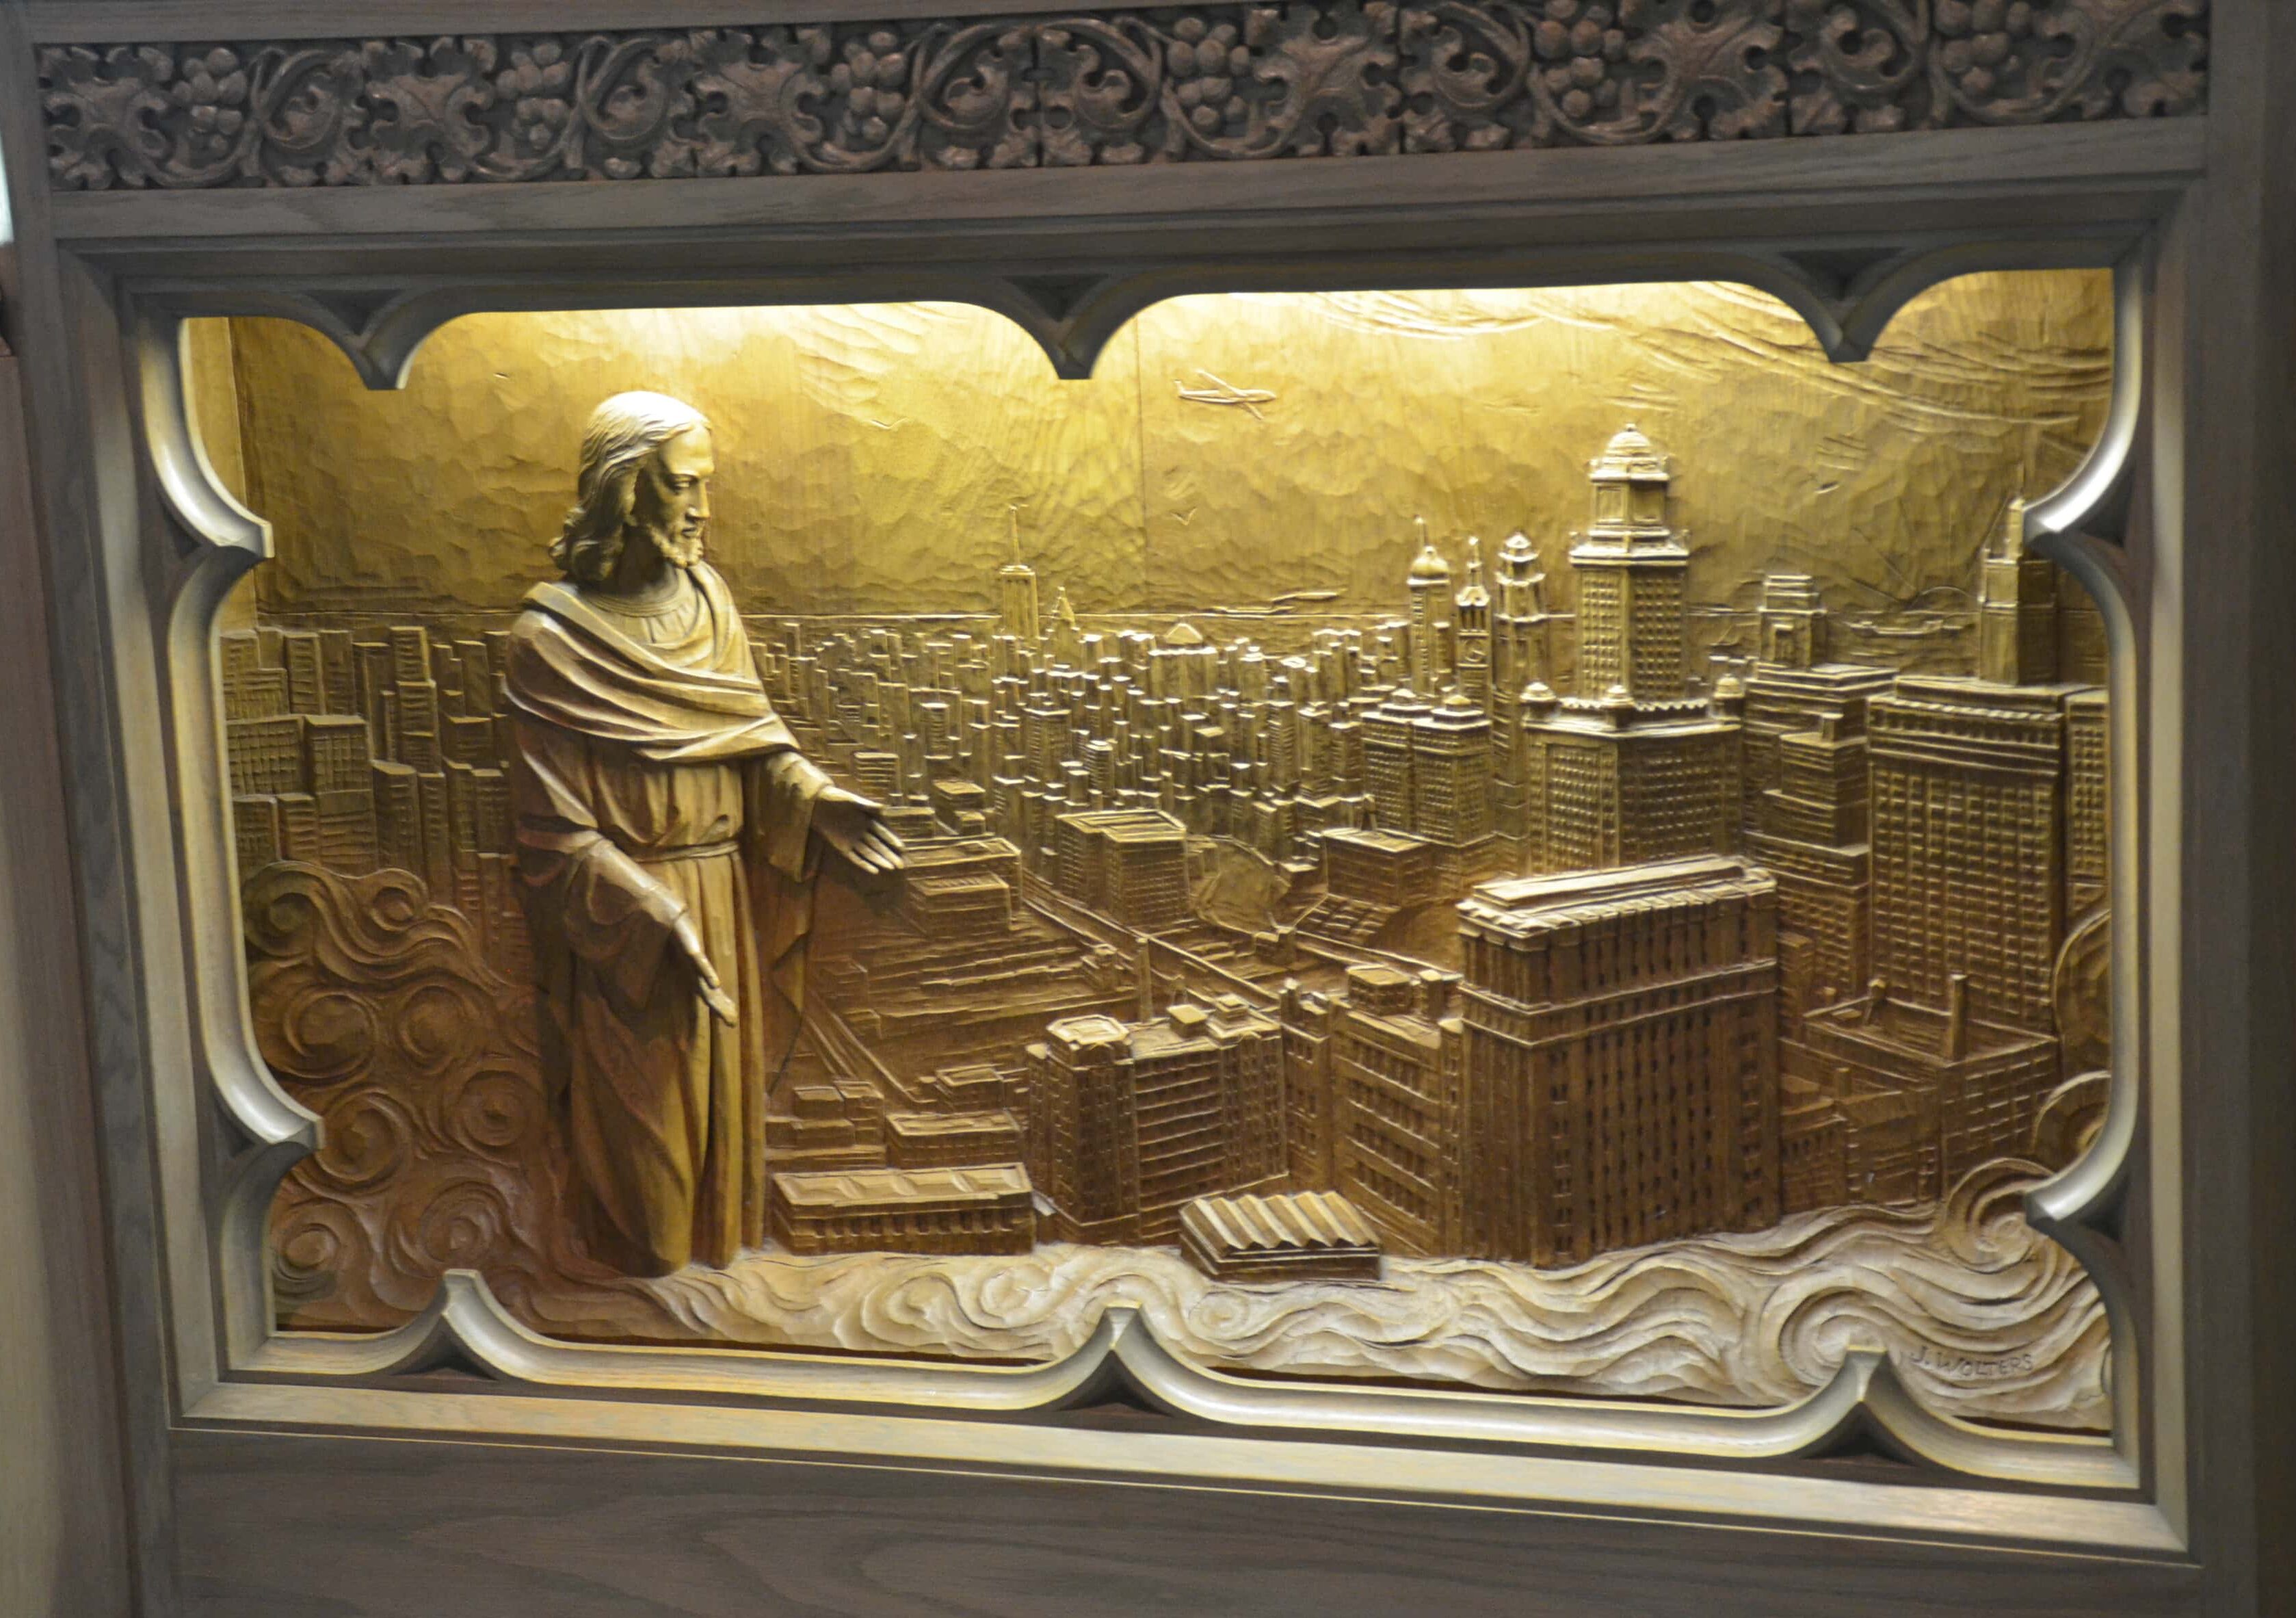 Christ weeping over Chicago in the Chapel in the Sky at the Chicago Temple in Chicago, Illinois